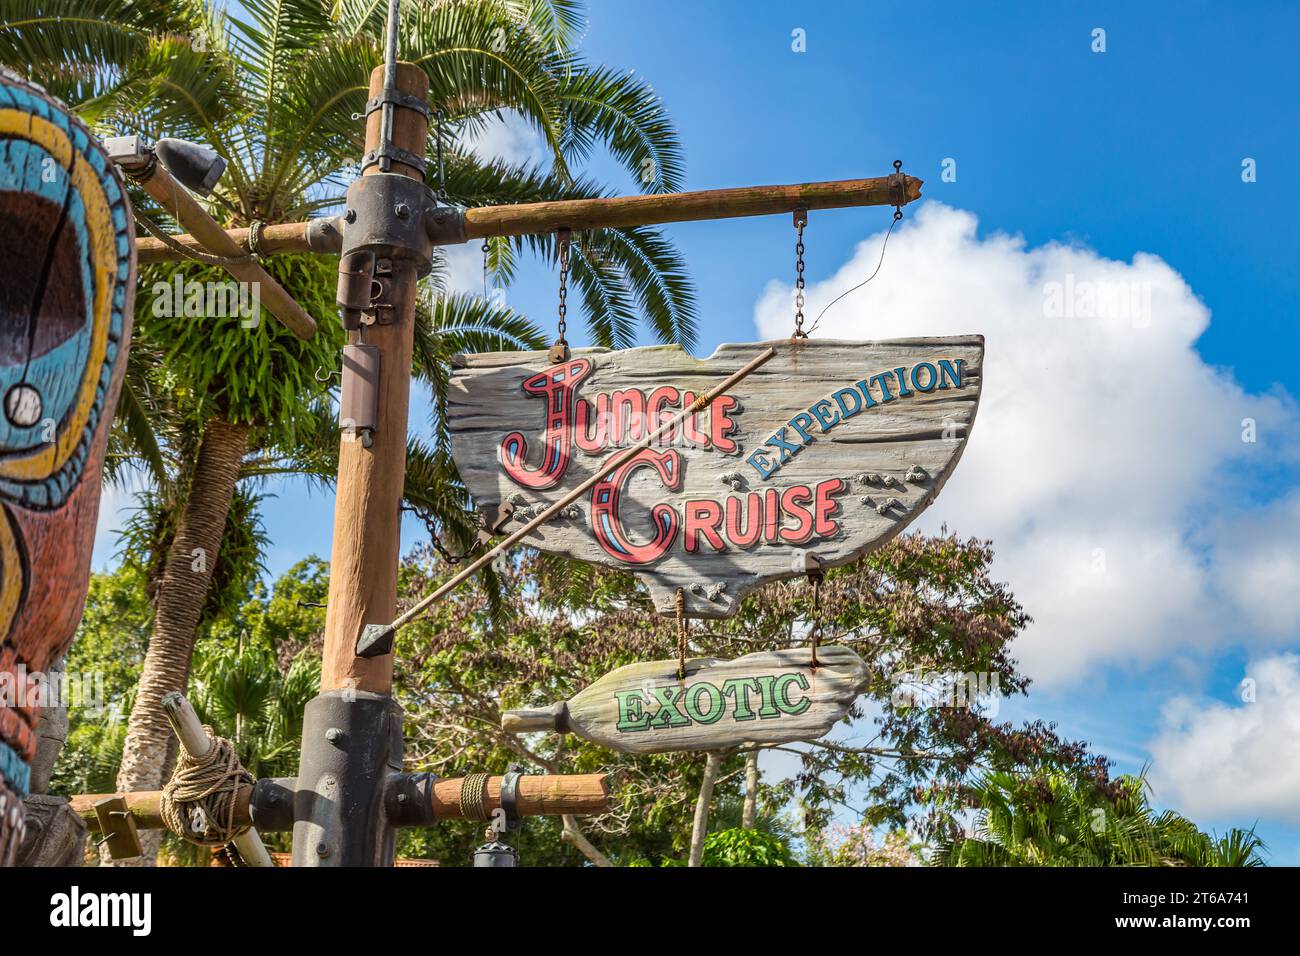 Sign for the Jungle Cruise Expedition attraction in the Adventureland area of the Magic Kingdom at Walt Disney World, Orlando, Florida Stock Photo